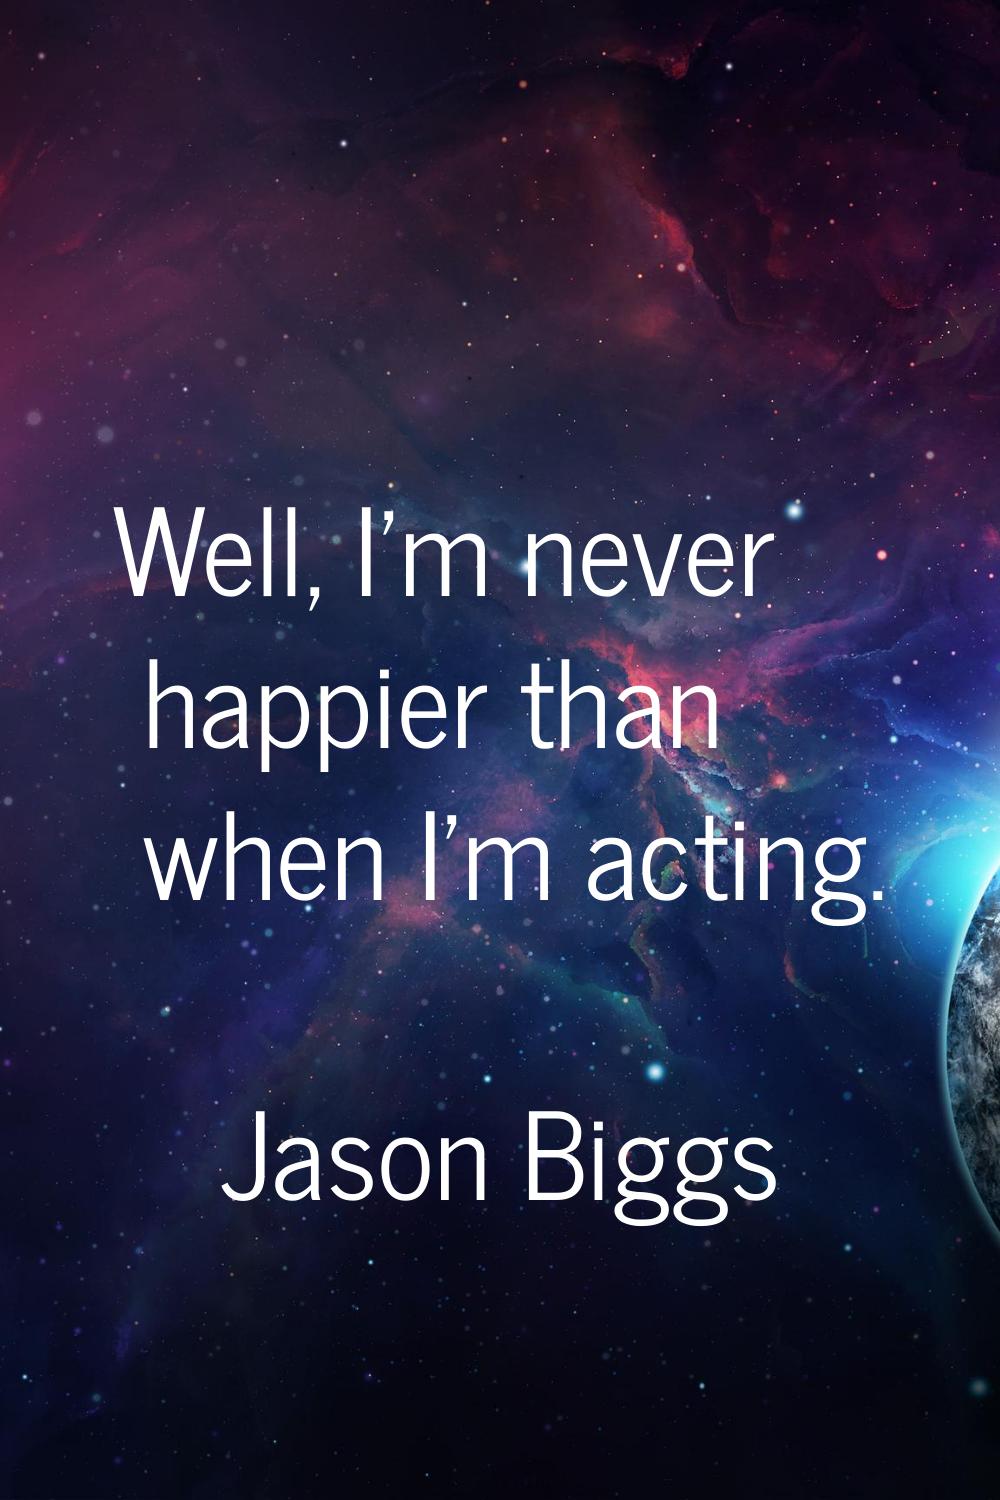 Well, I'm never happier than when I'm acting.